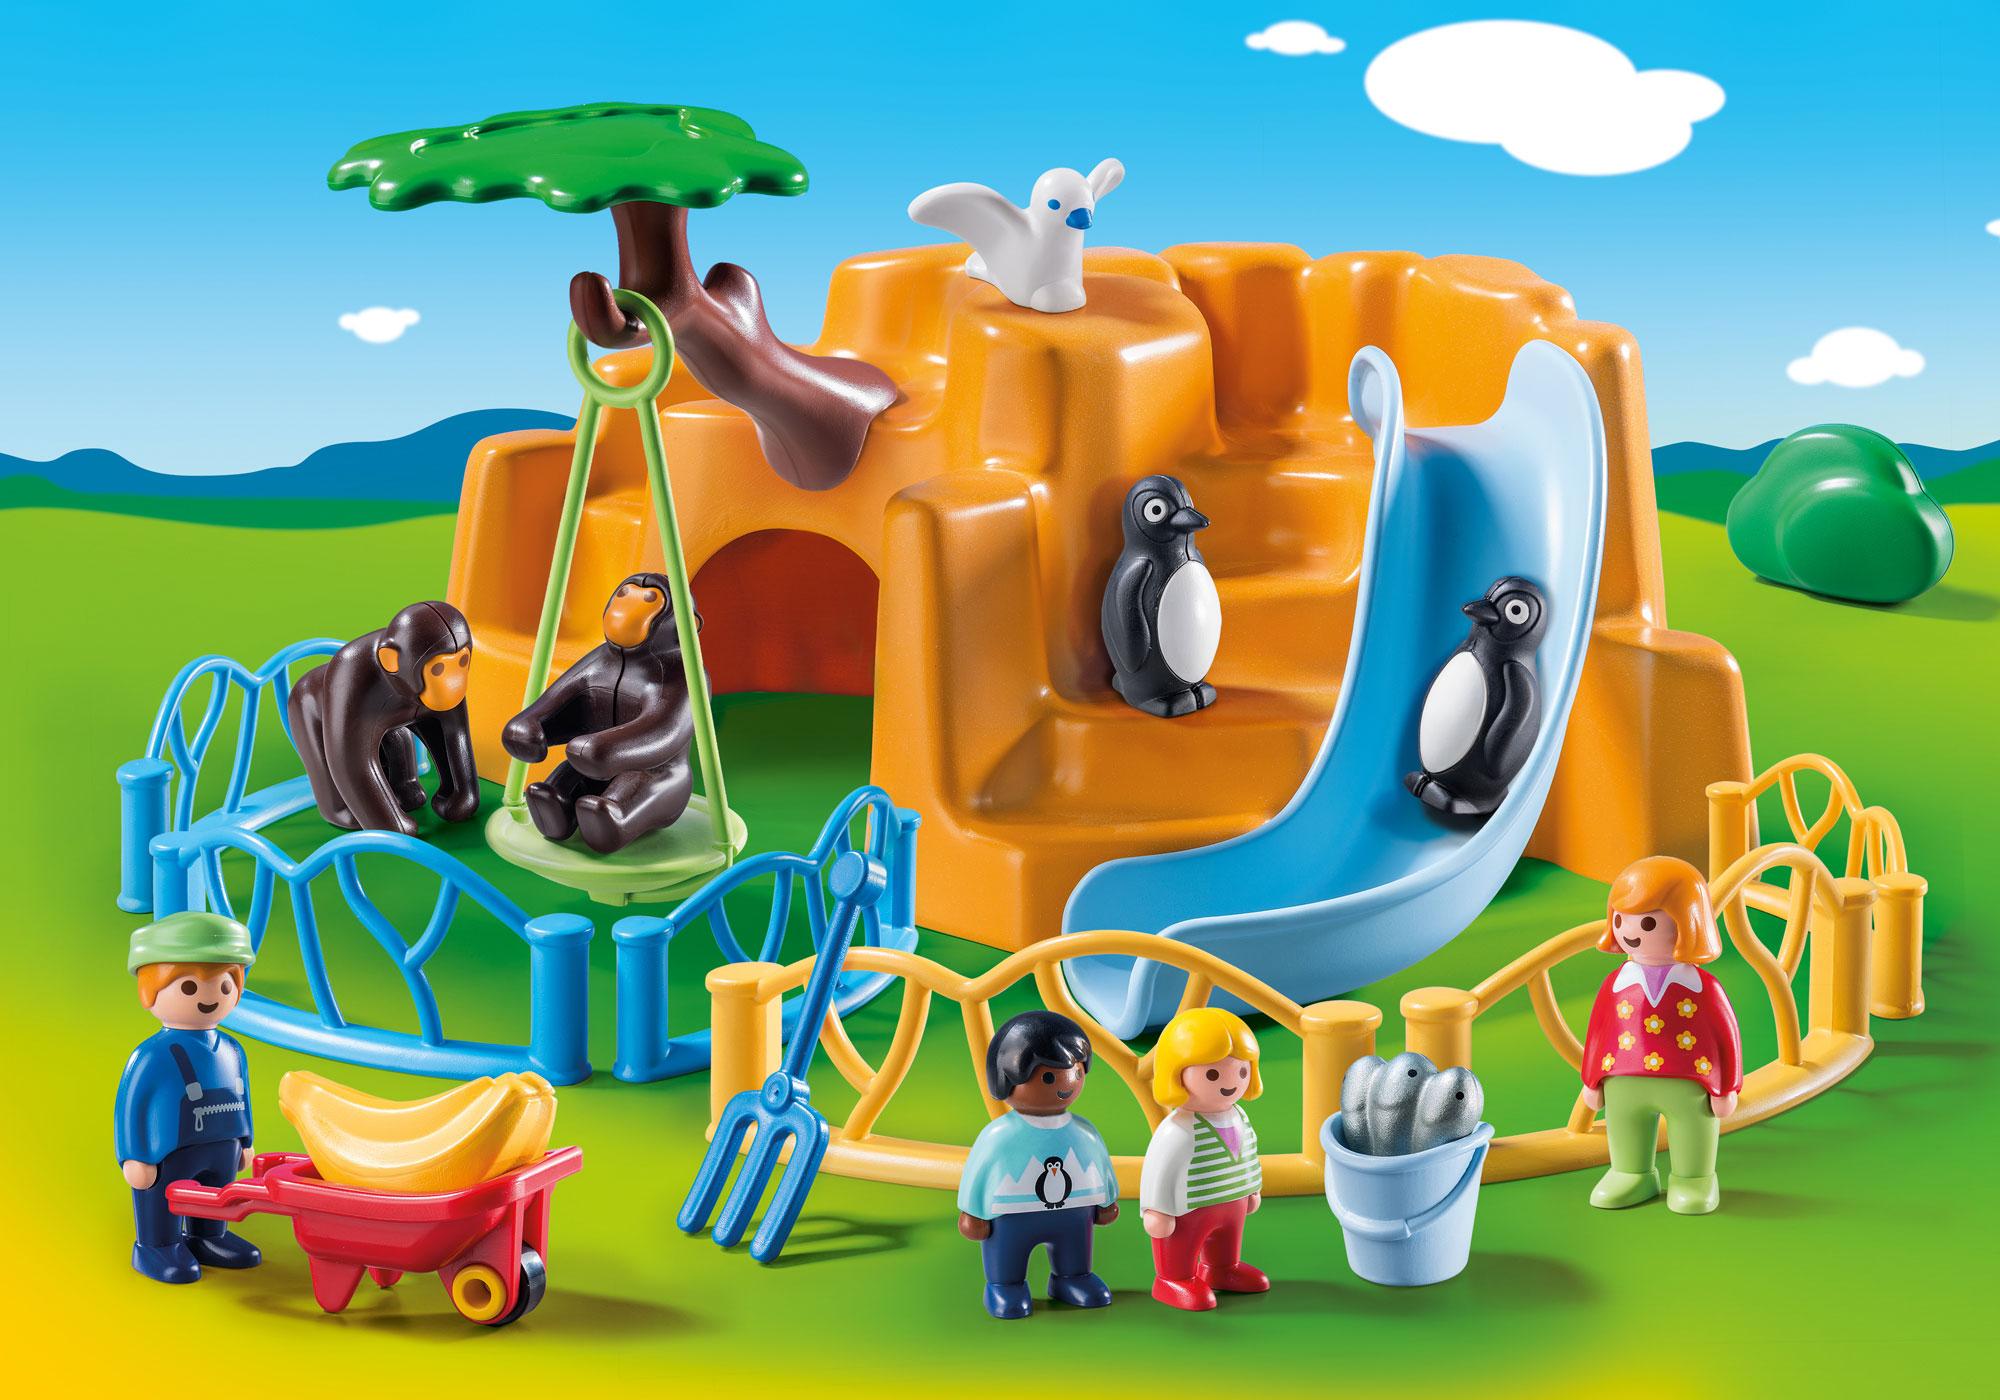 playmobil 2 year old